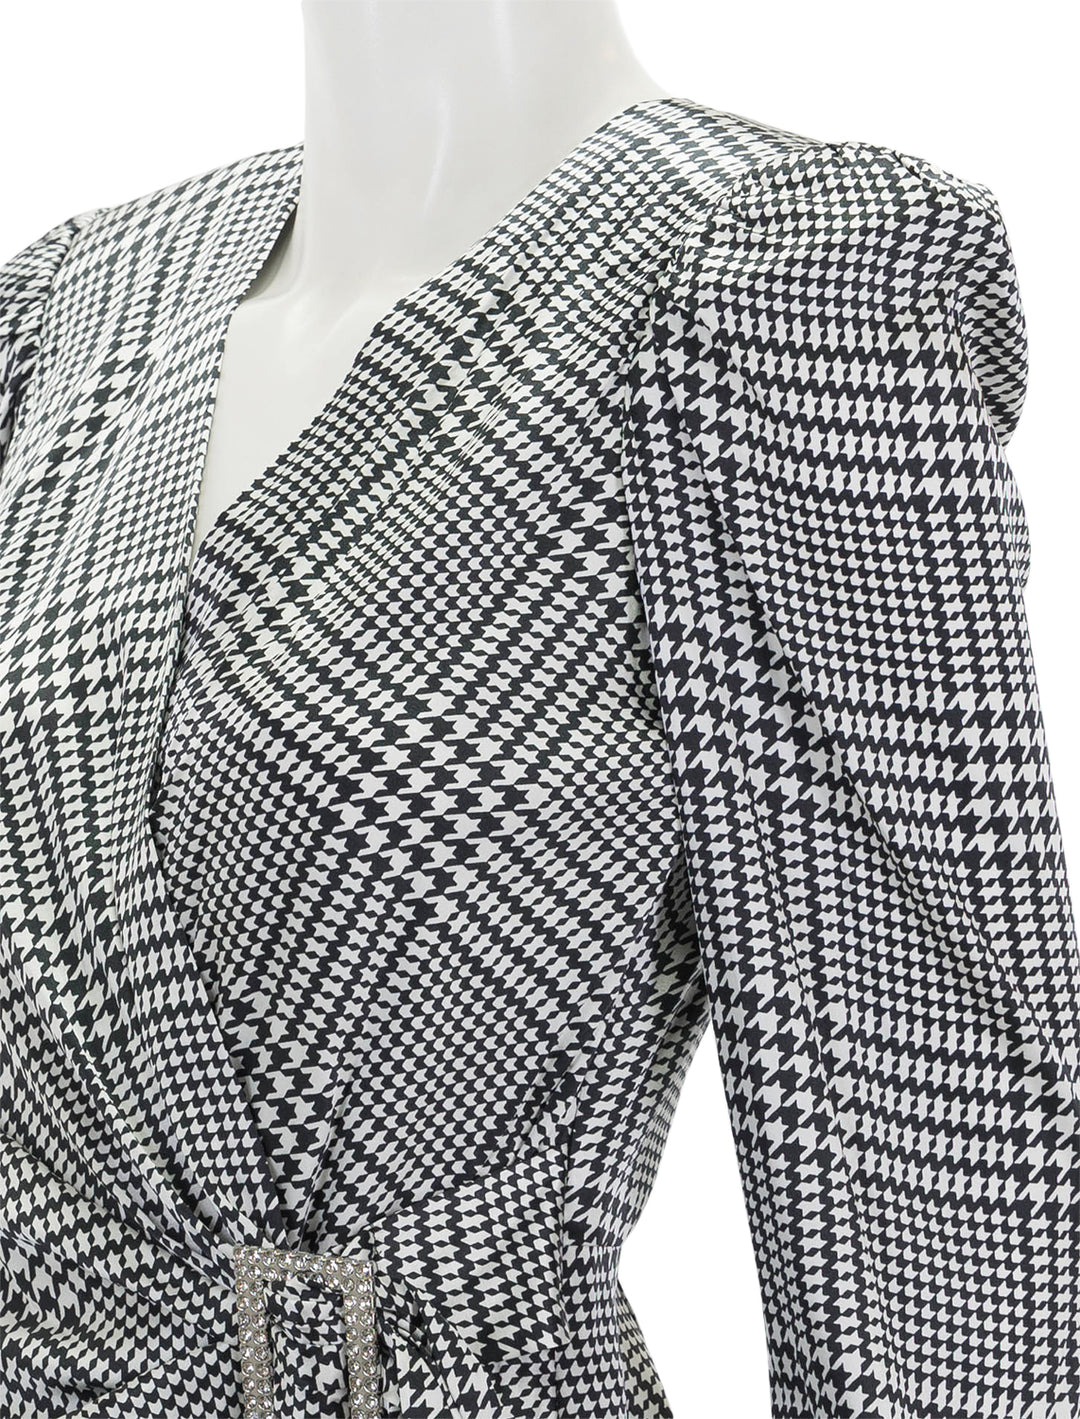 Close-up view of L'agence's bensen wrap blouse in ivory and black plaid.